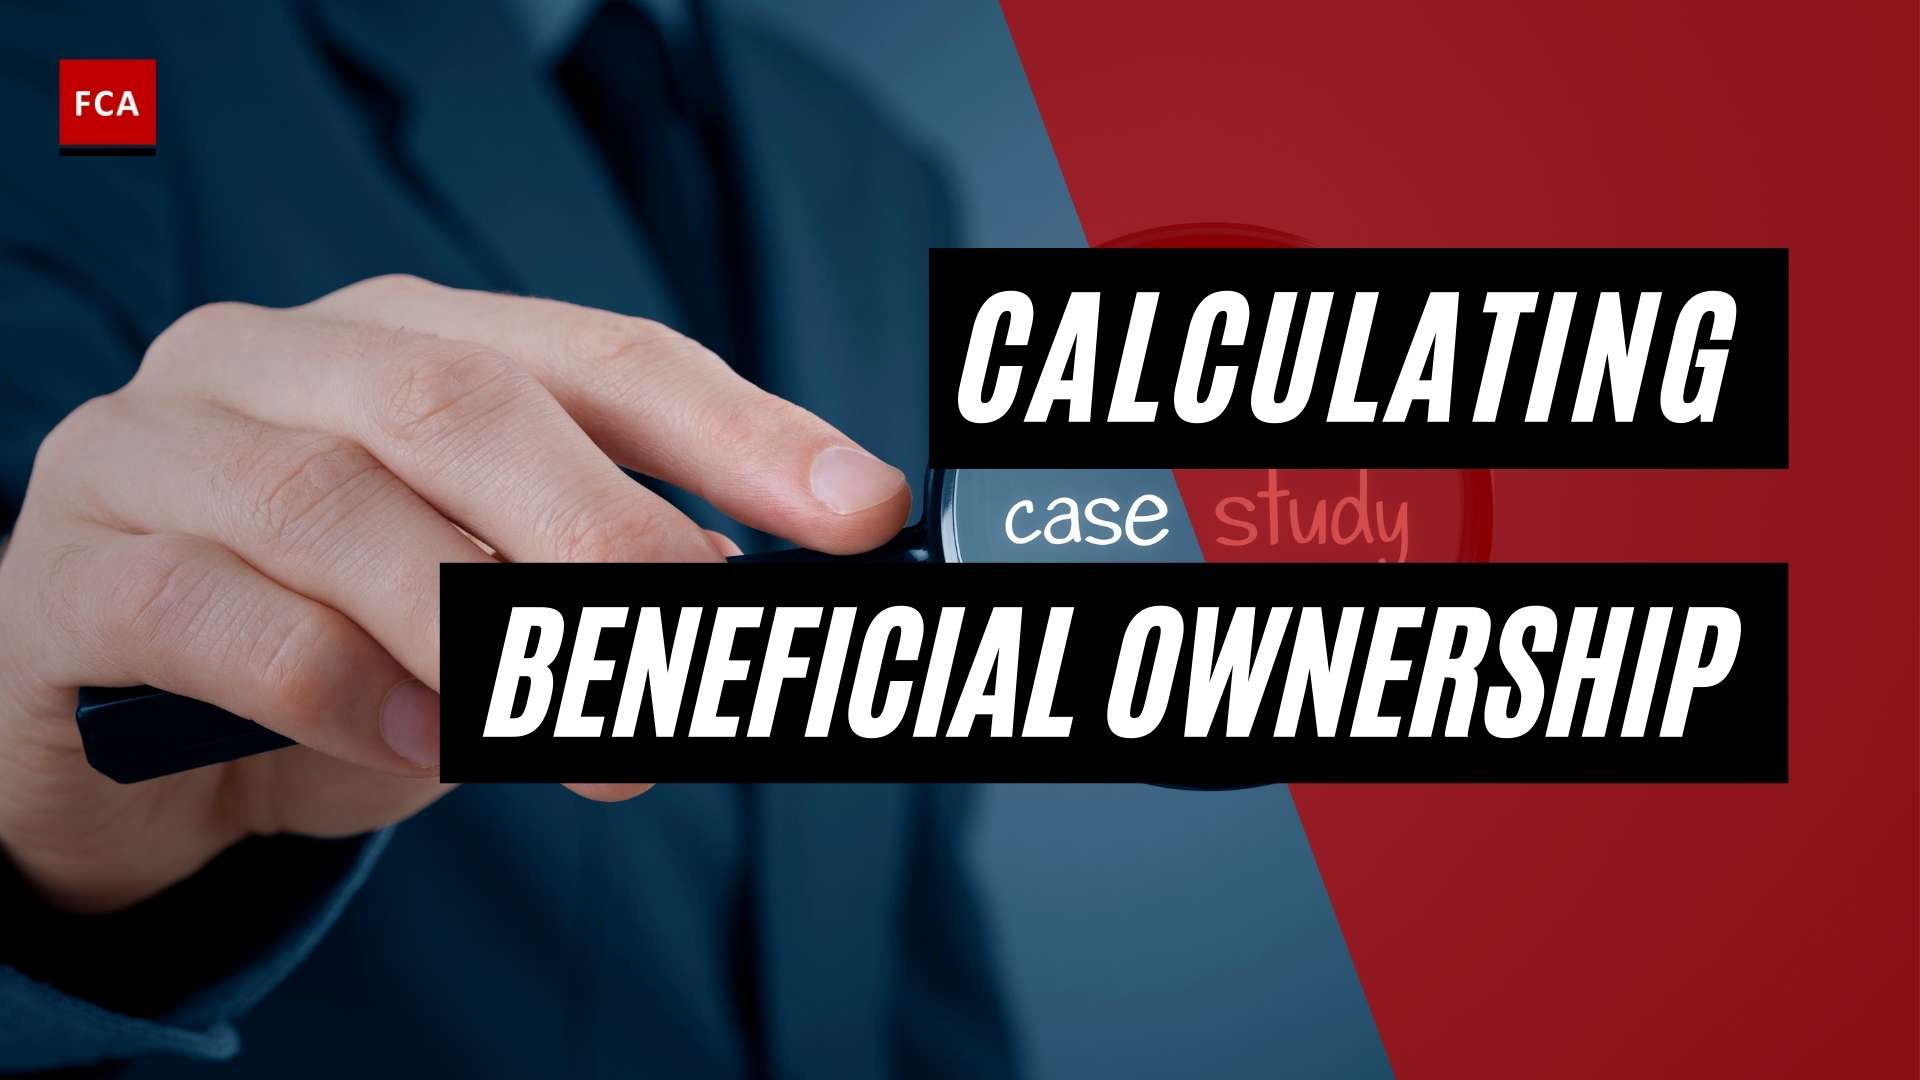 Comprehensive Case Study On Calculating Beneficial Ownership - Featured Image